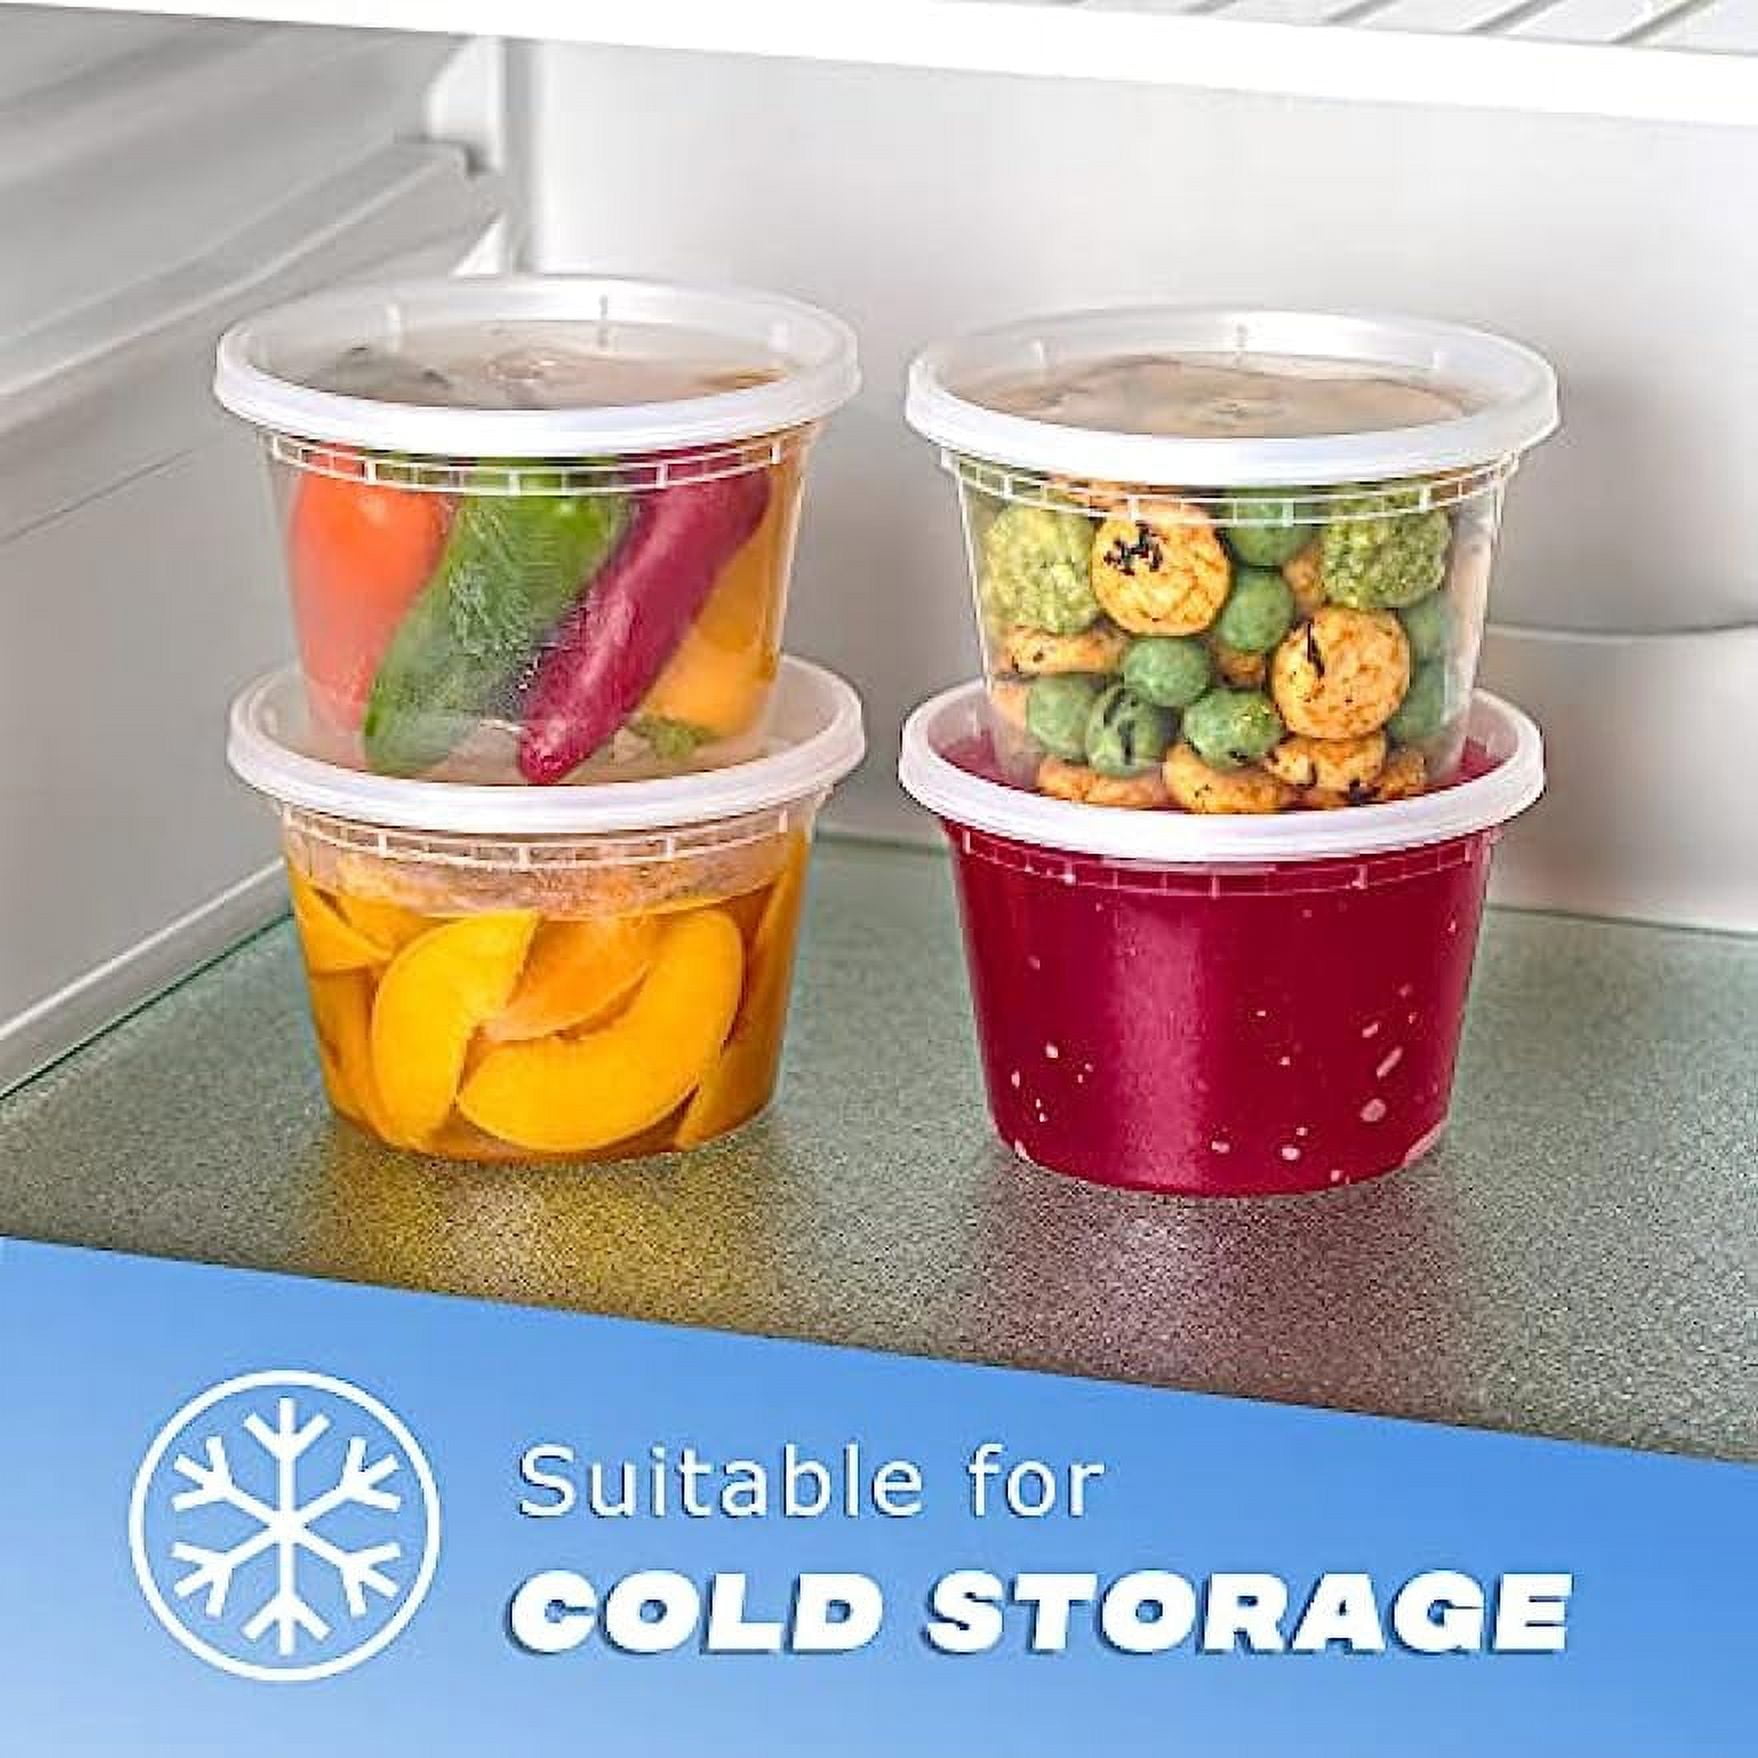 ChoiceHD 16 oz. Microwavable Translucent Plastic Deli Container